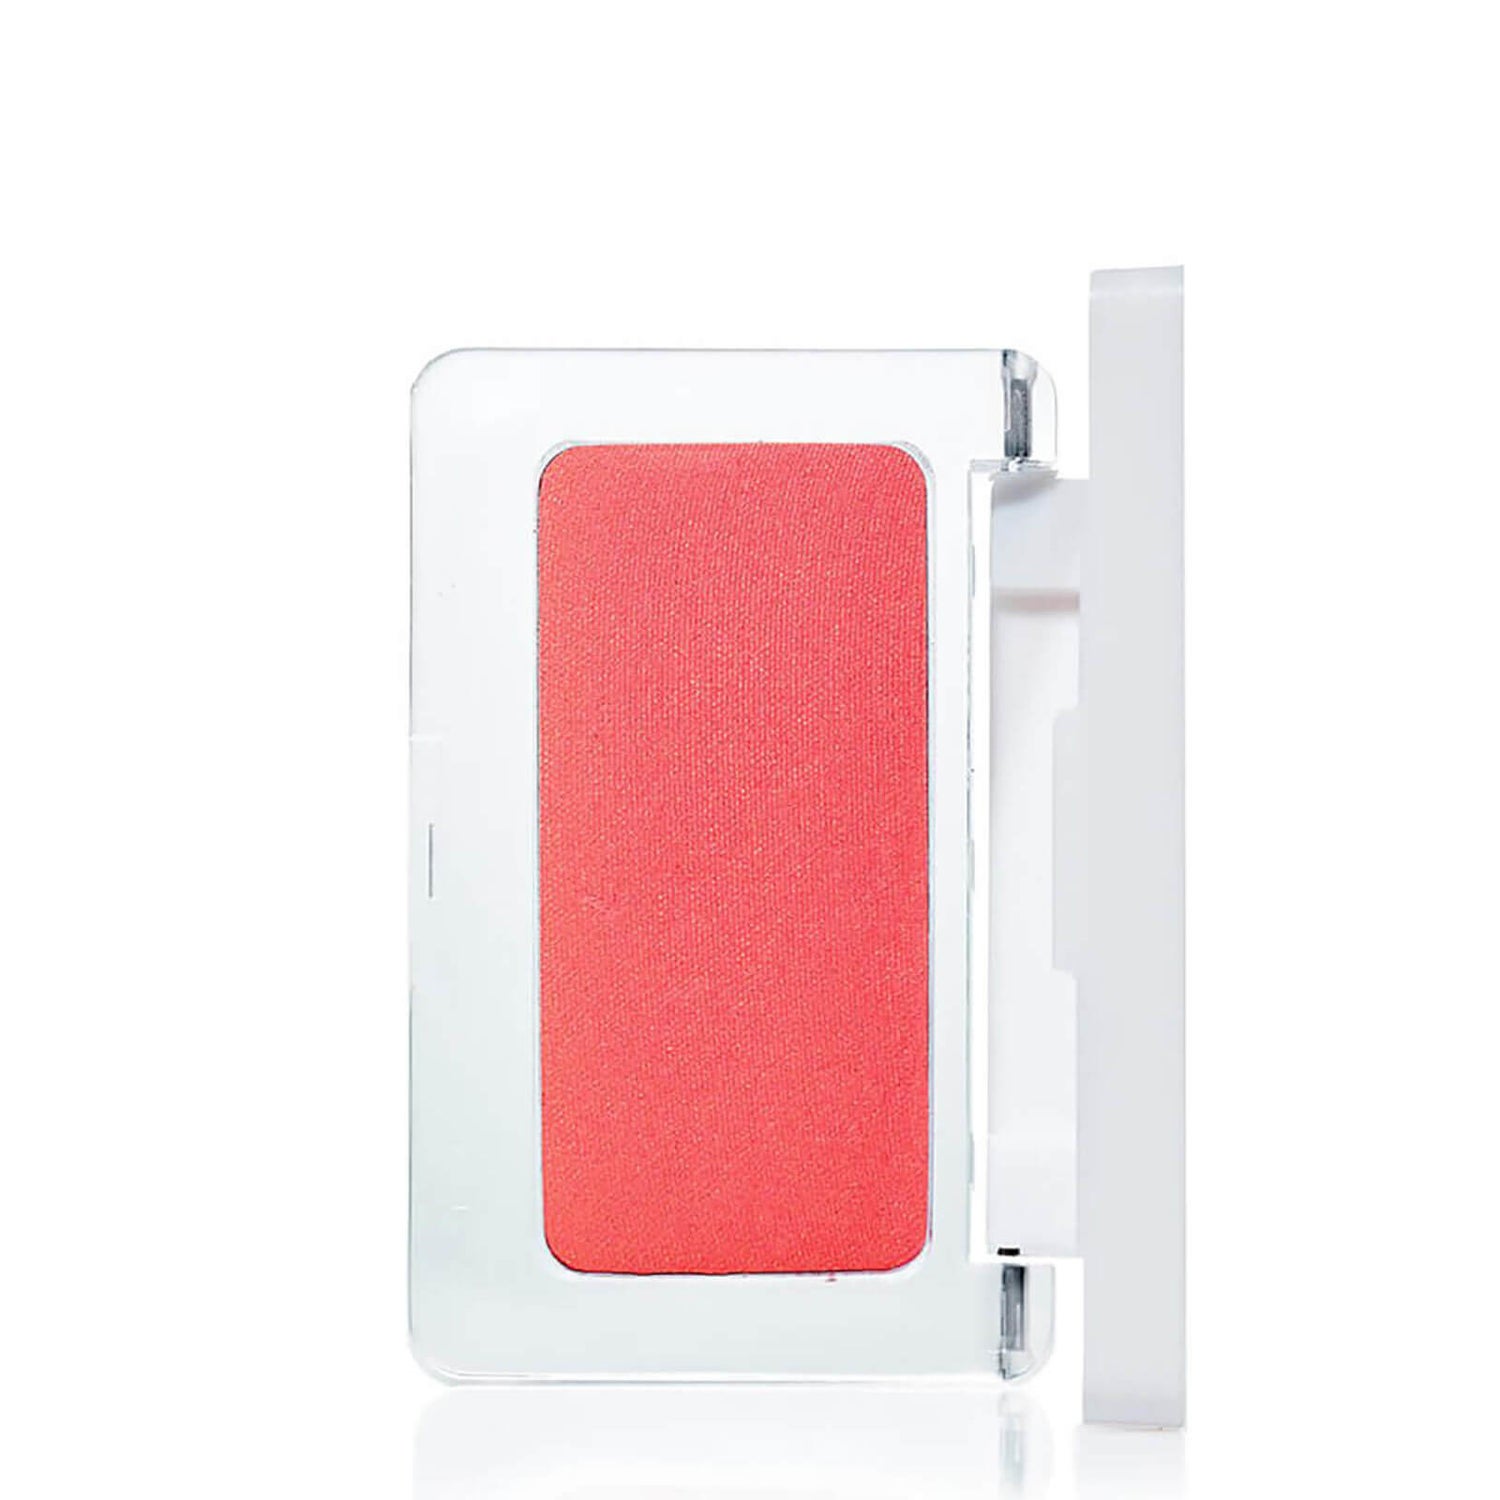 RMS Beauty Pressed Blush - Crushed Rose (0.17 oz.)